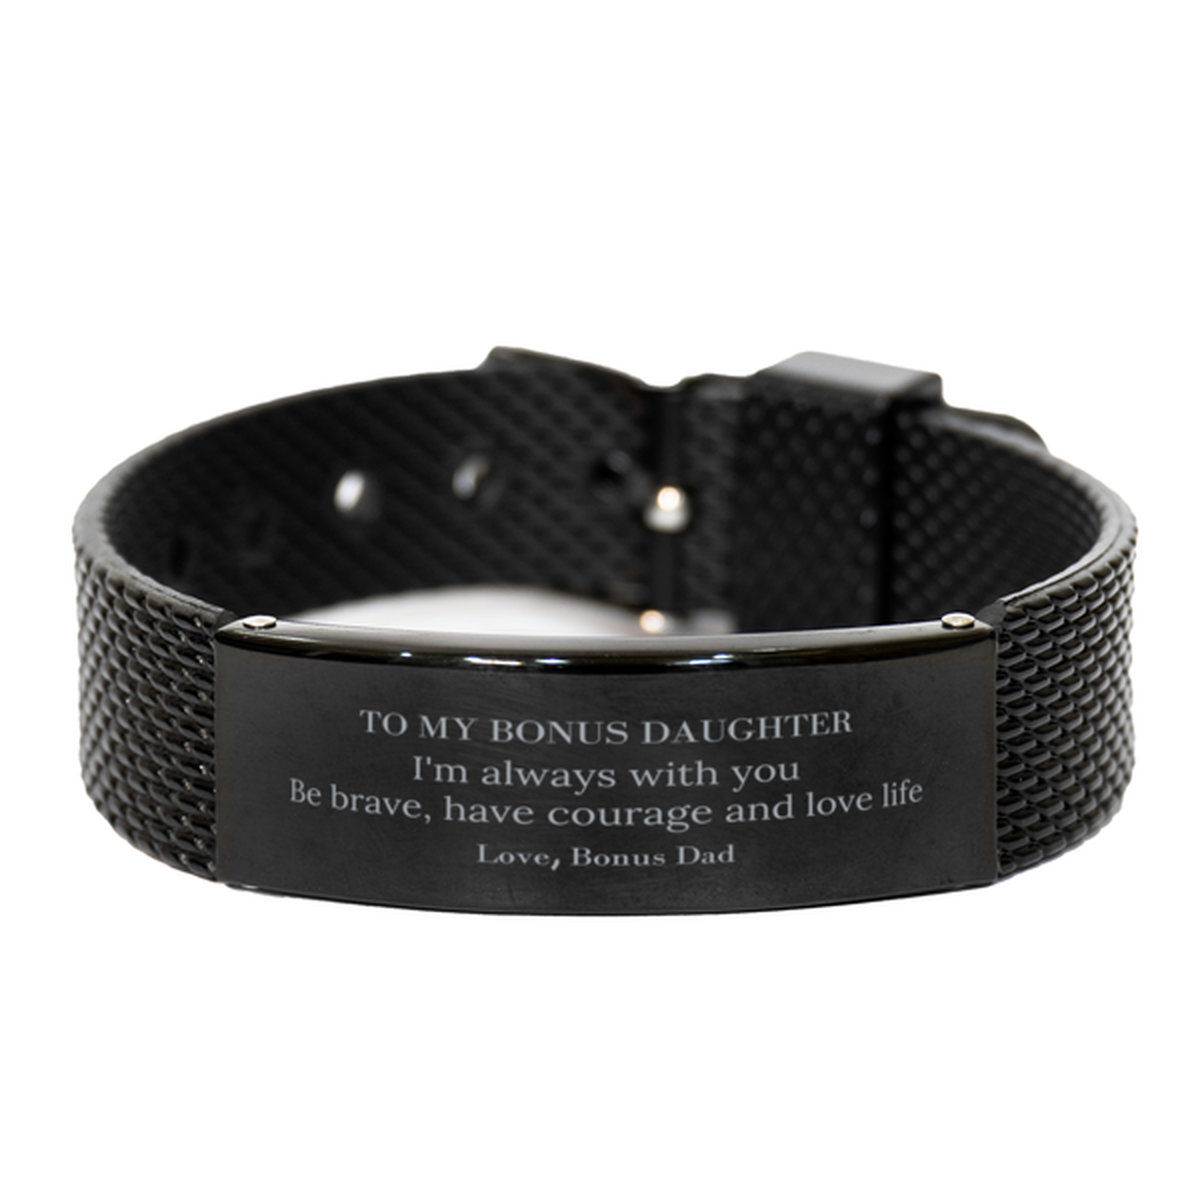 To My Bonus Daughter Gifts from Bonus Dad, Unique Black Shark Mesh Bracelet Inspirational Christmas Birthday Graduation Gifts for Bonus Daughter I'm always with you. Be brave, have courage and love life. Love, Bonus Dad